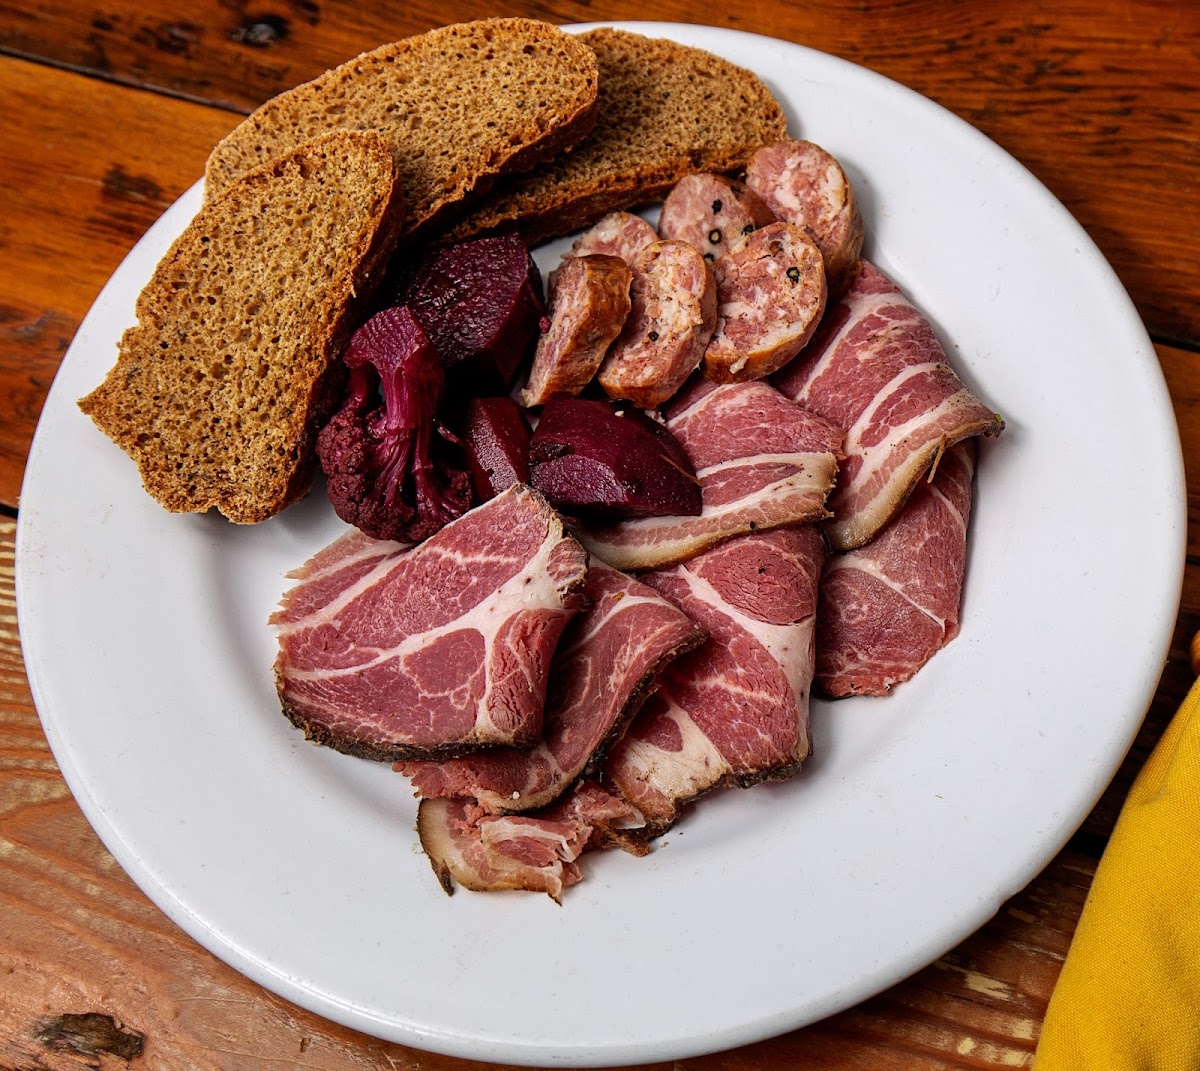 Cured Meat plate with soppressata, Proscuitto, pickled root vegetables, gluten free bread